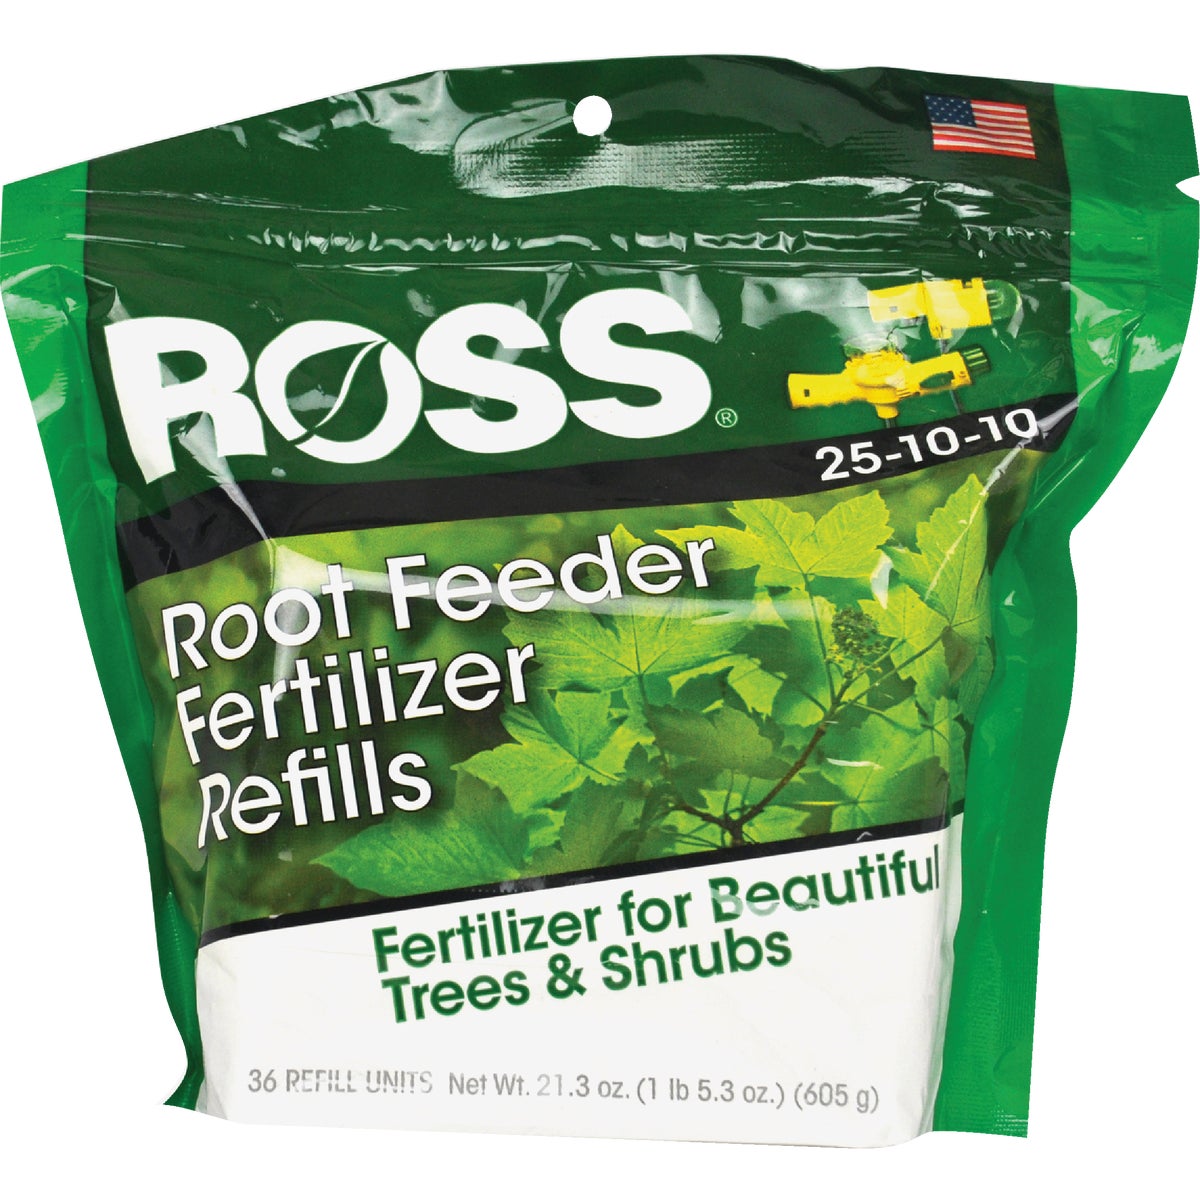 Item 705849, Root feeder fertilizer refills. Produces beautiful trees and shrubs.